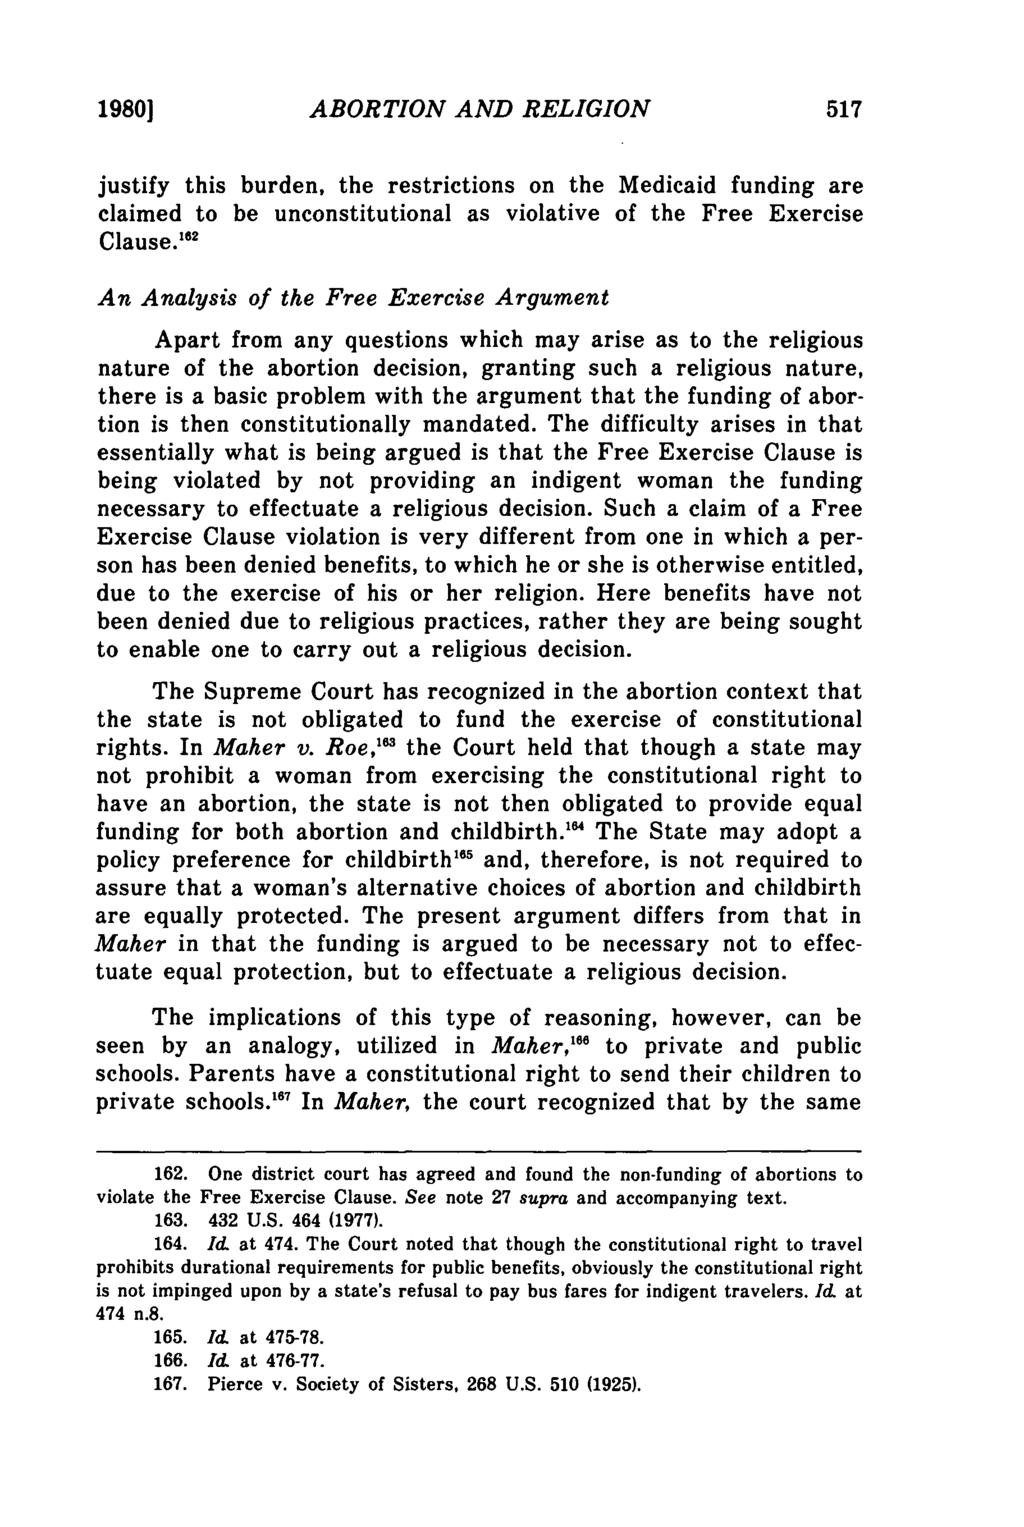 1980] Skahn: Abortion Laws, Religious Beliefs and the First Amendment ABORTION AND RELIGION justify this burden, the restrictions on the Medicaid funding are claimed to be unconstitutional as